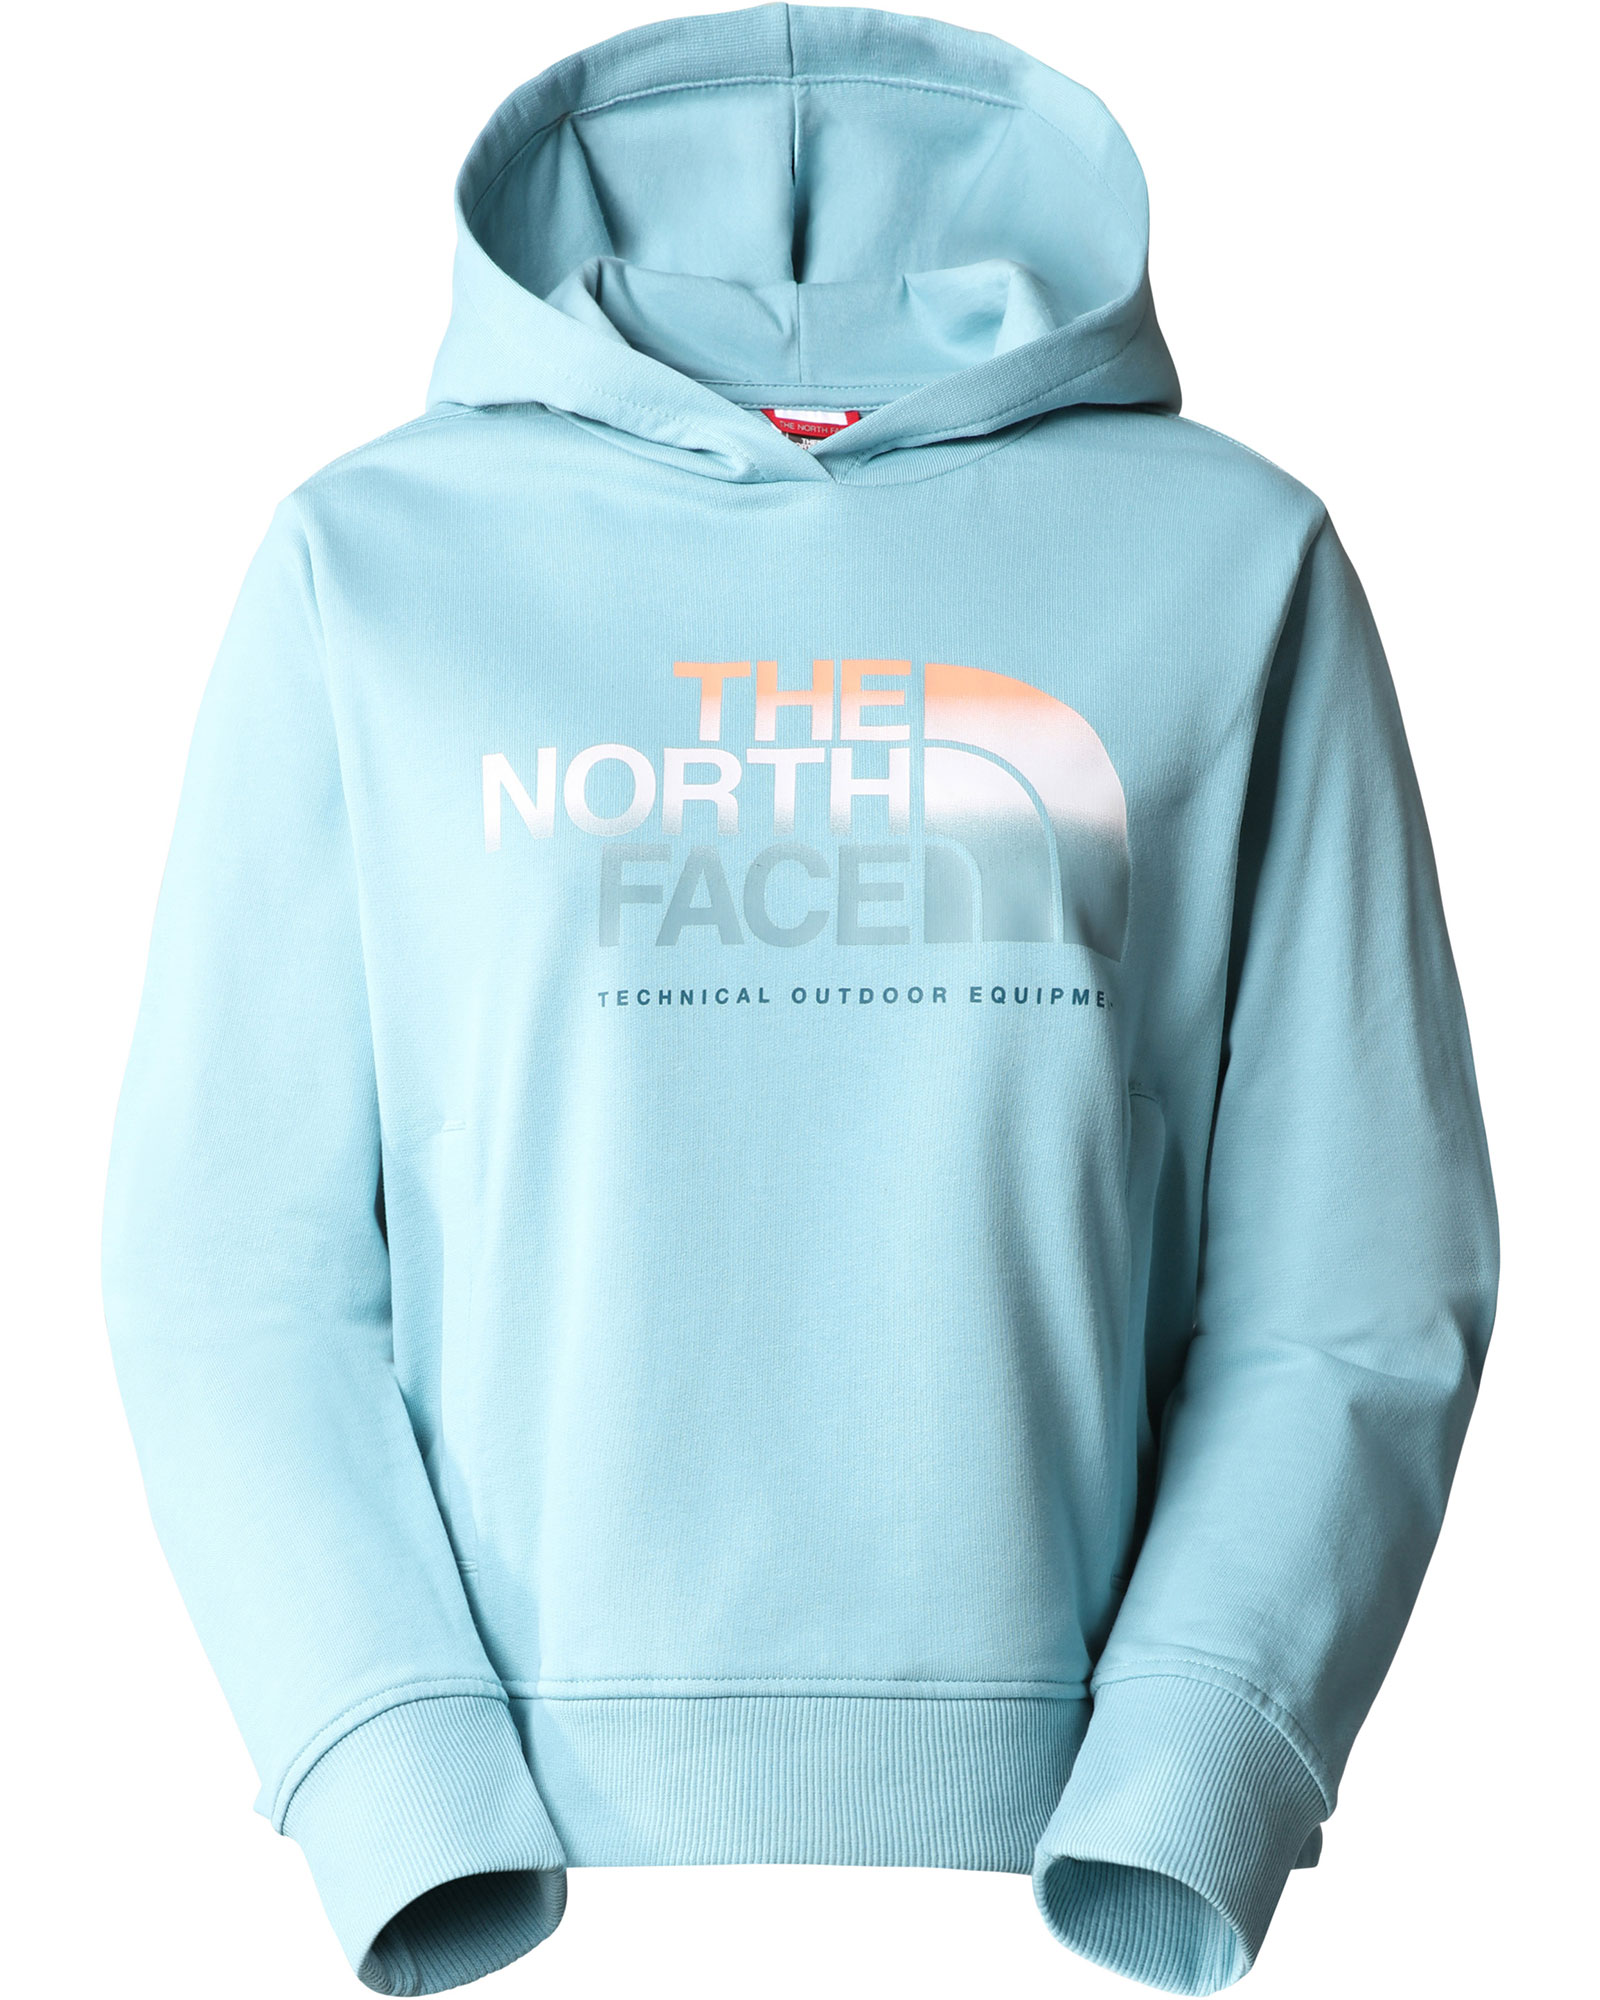 The North Face Women’s D2 Graphic Crop Hoodie - Reef Waters XS